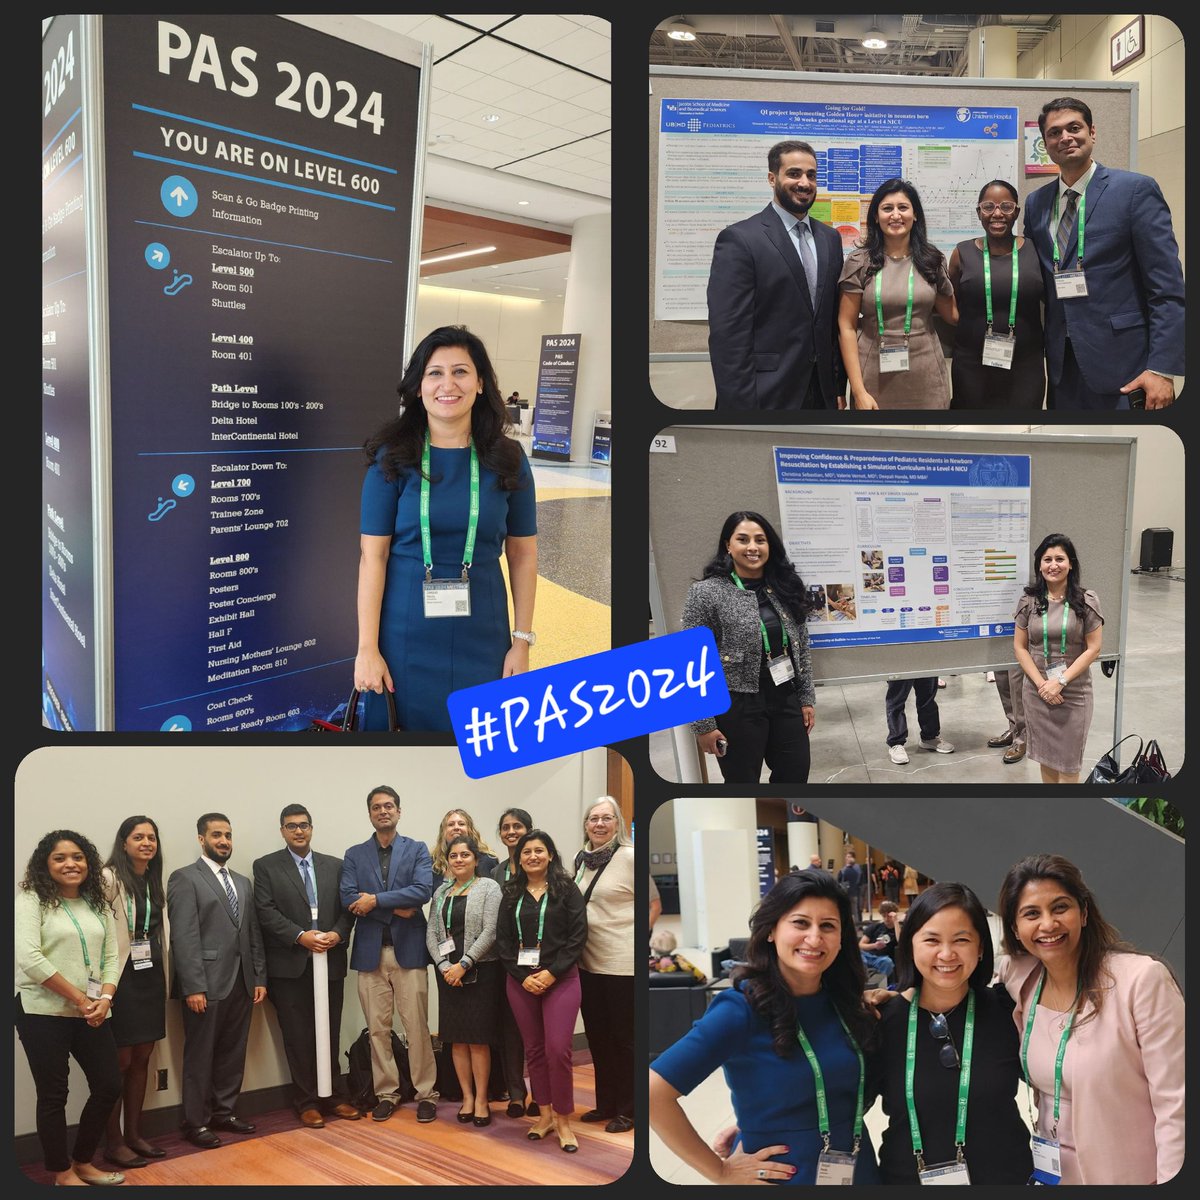 Adios Toronto! @PASMeeting #PAS2024 wht fun to share our projects & learn cutting edge research frm across country n beyond.. going bak w more ideas/projects🥰 @AAPneonatal @WomenNeo @jayasreenairneo @chandrpk @munmun_rawat @neosatyan @Kayrao14 @NICUBatman @MarykasuMD @vyapmd